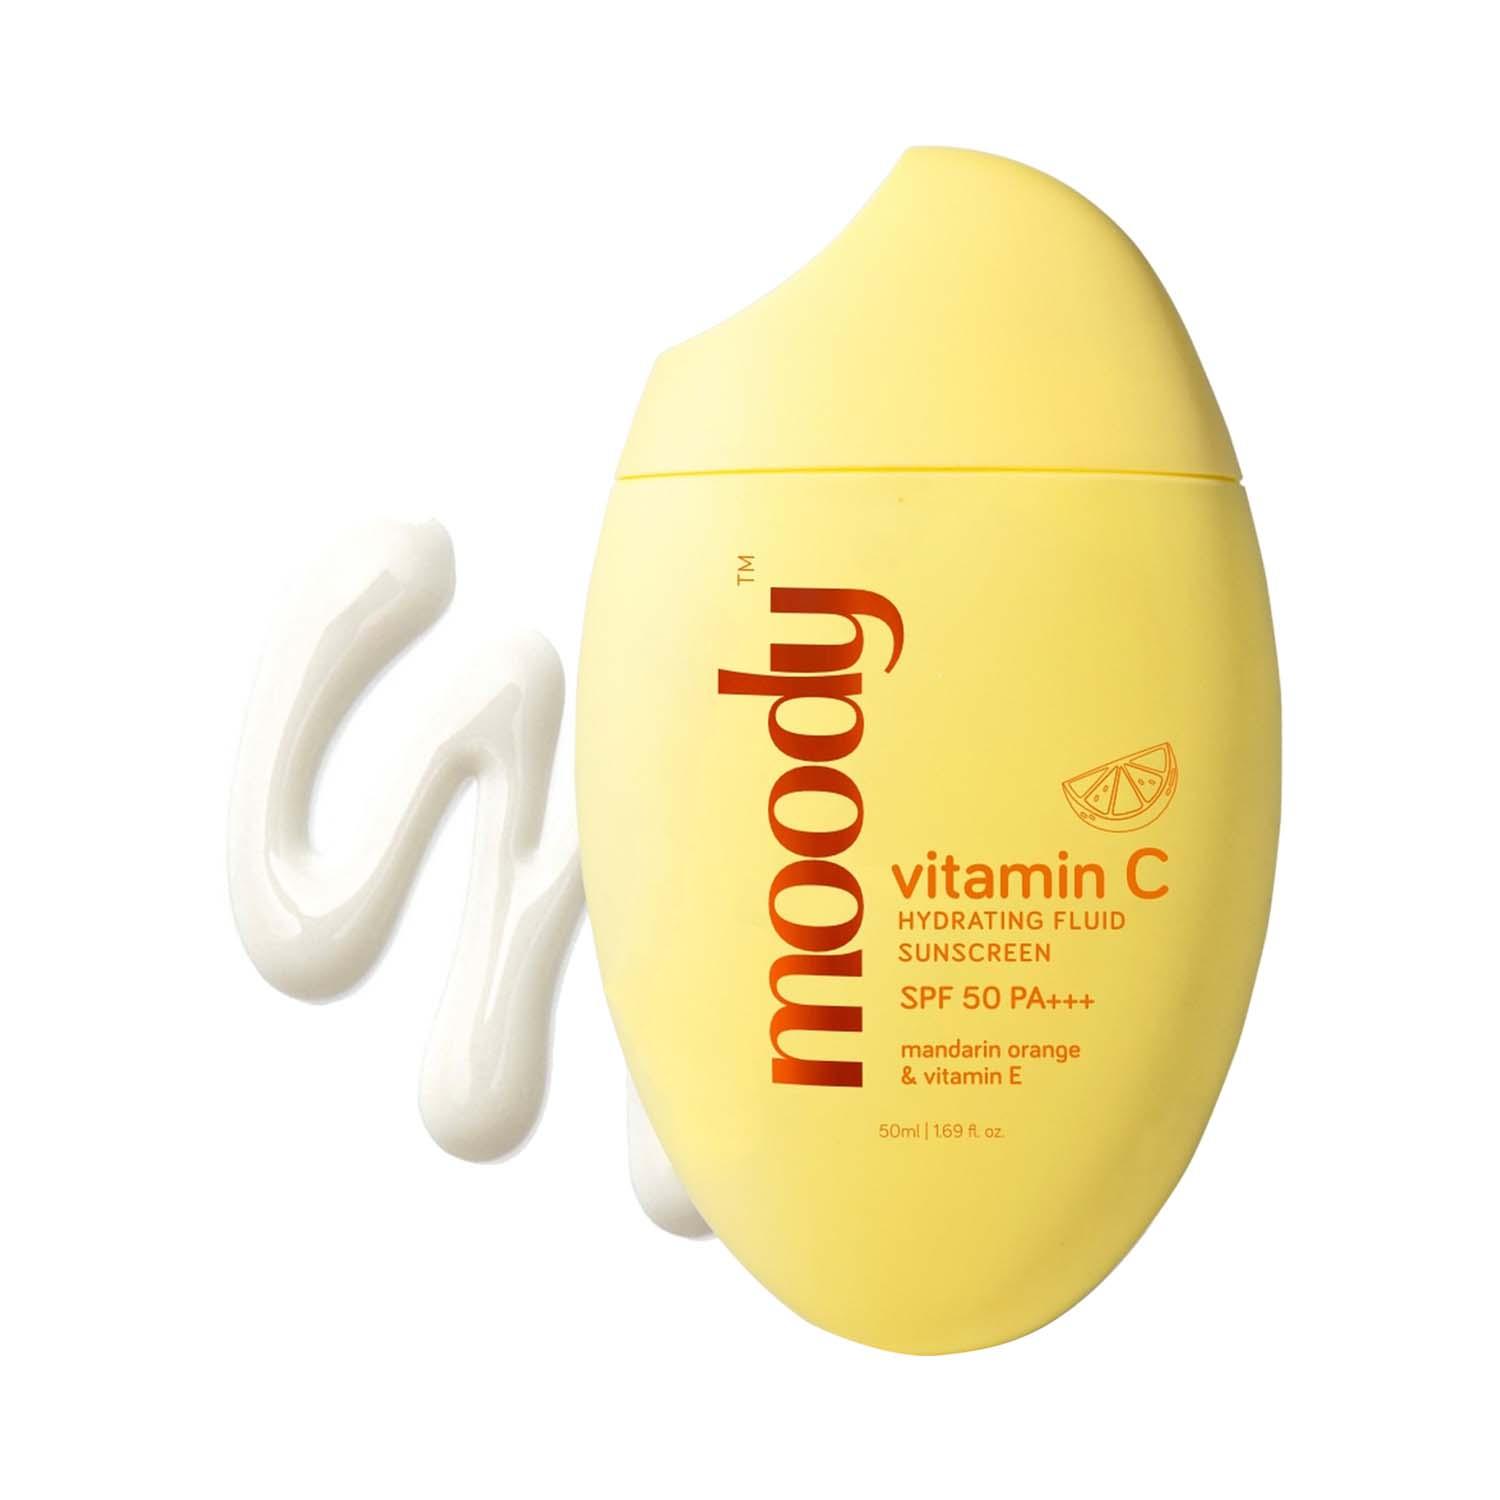 Moody Vitamin C Hydrating Fluid Sunscreen with SPF 50 PA+++ (50 ml)